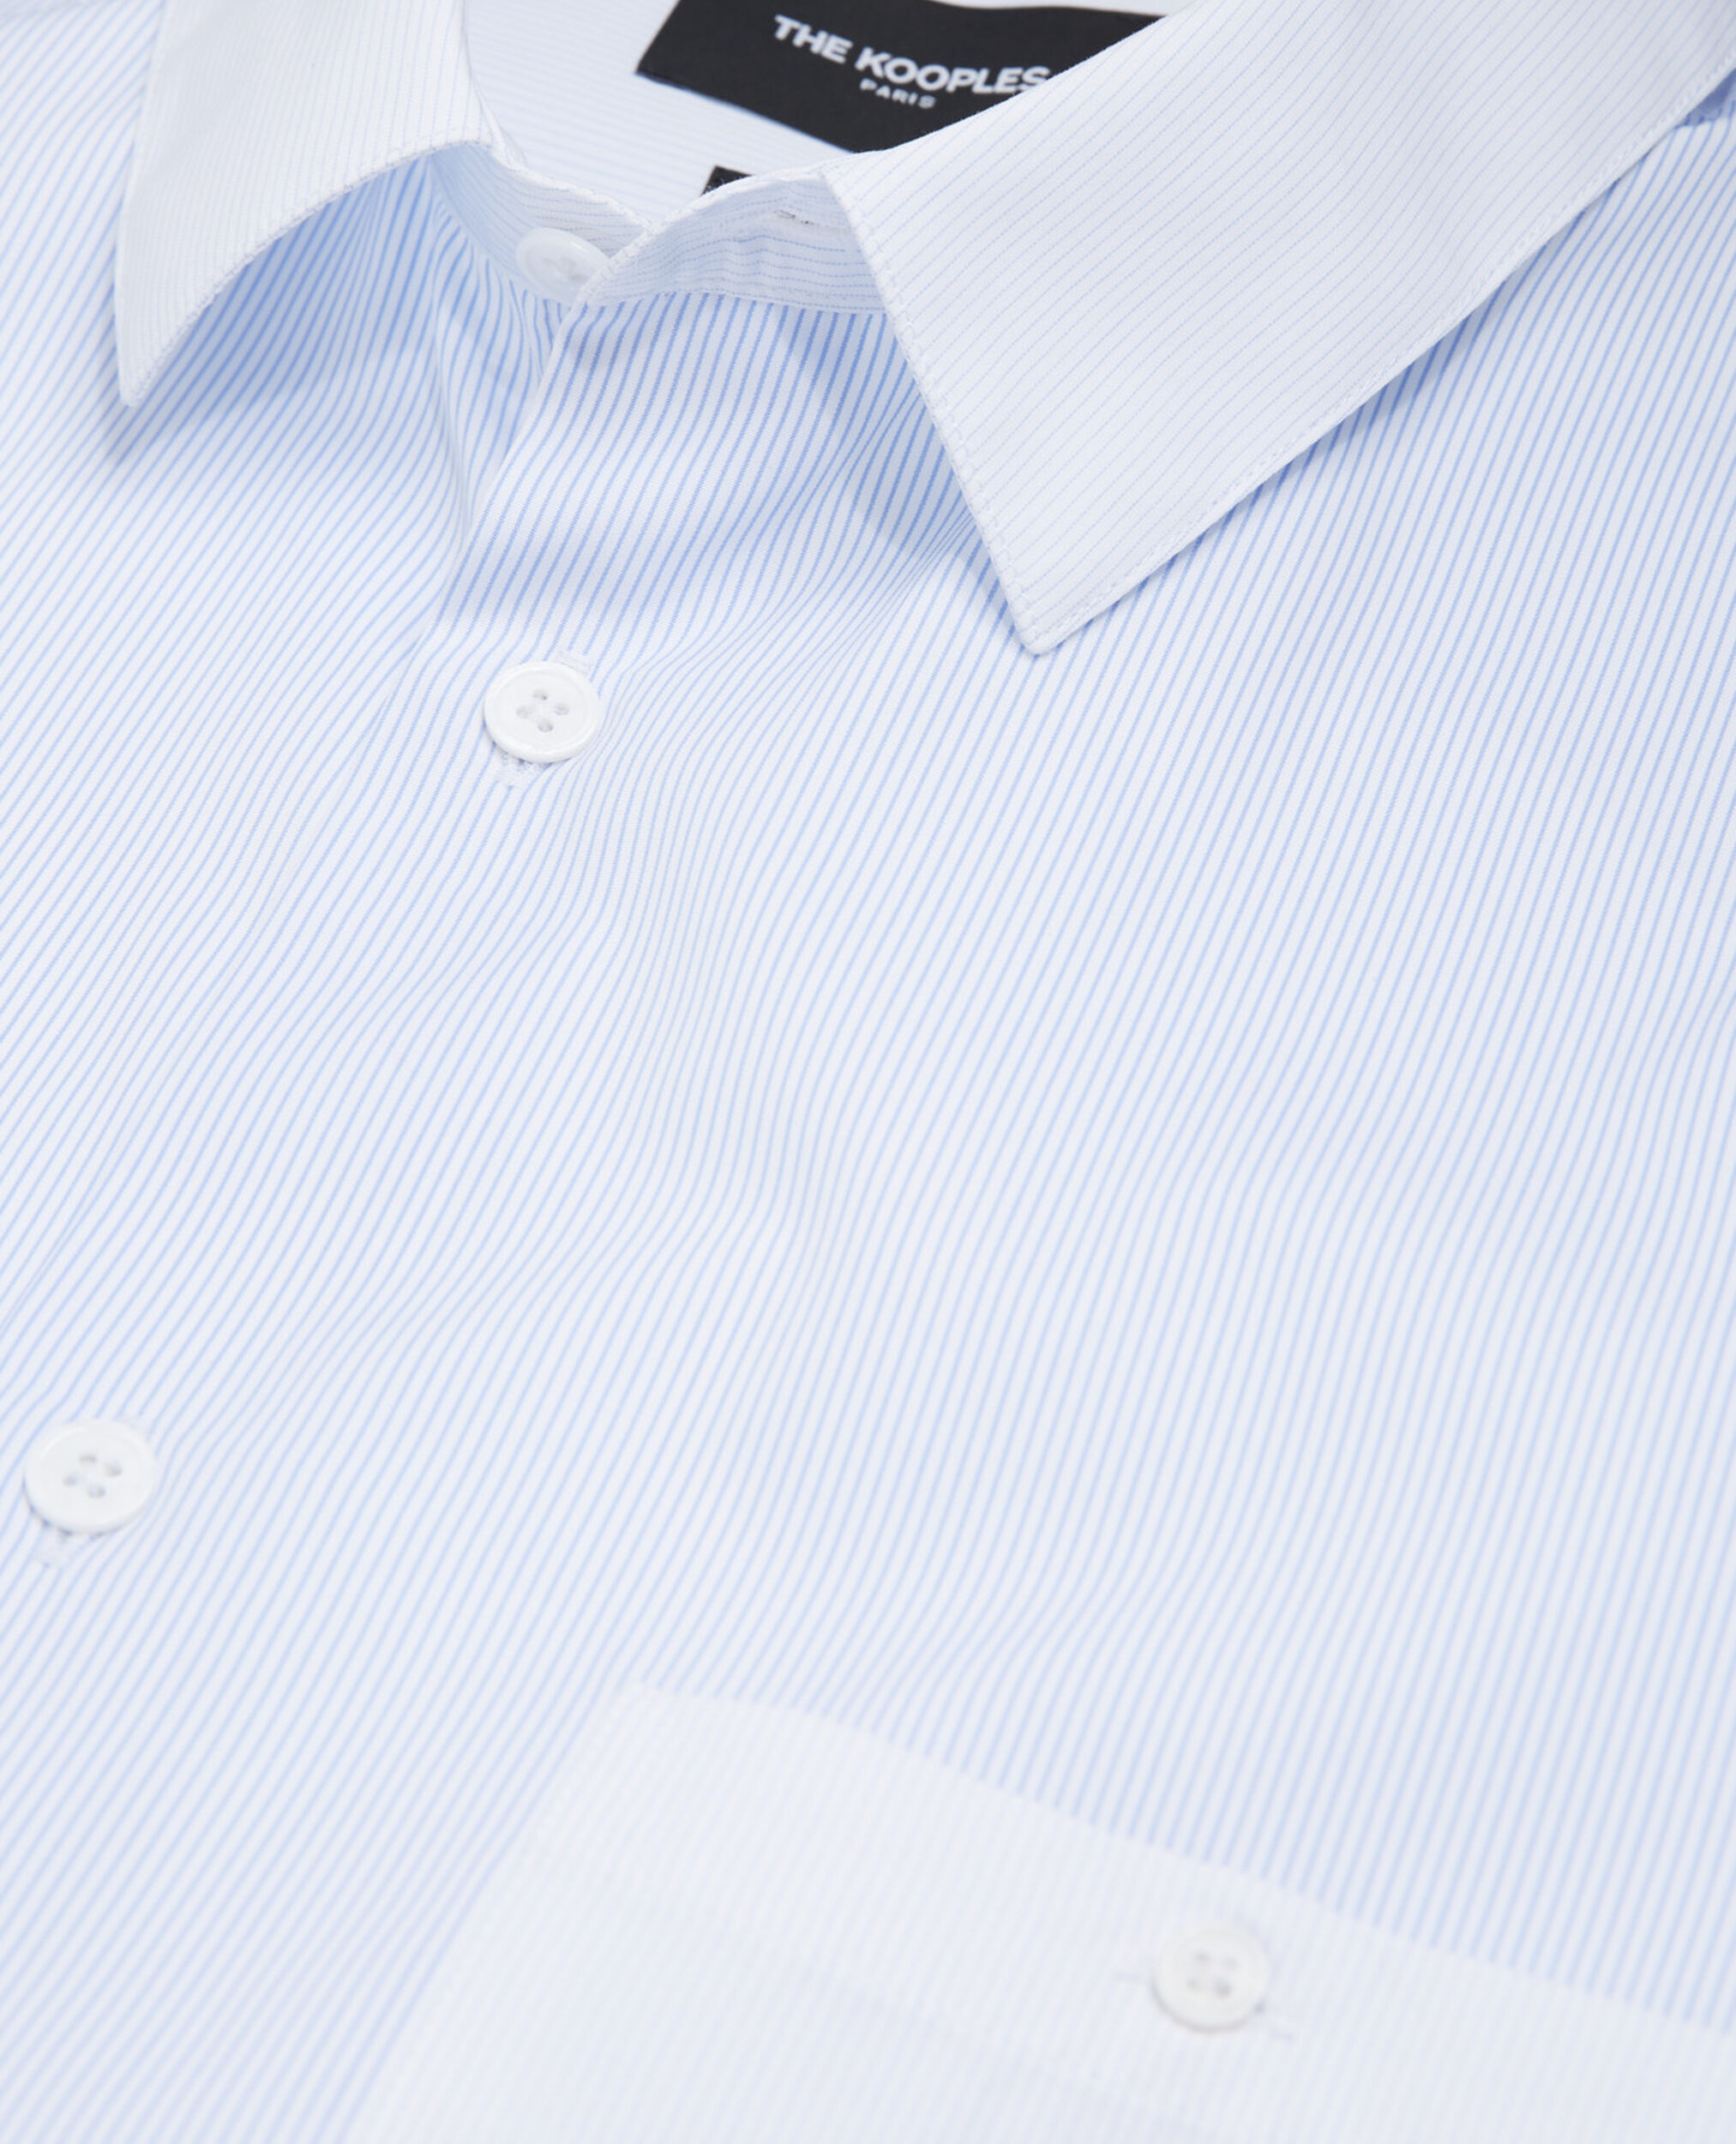 White collar shirt with sky blue stripes, WHITE / SKY BLUE, hi-res image number null